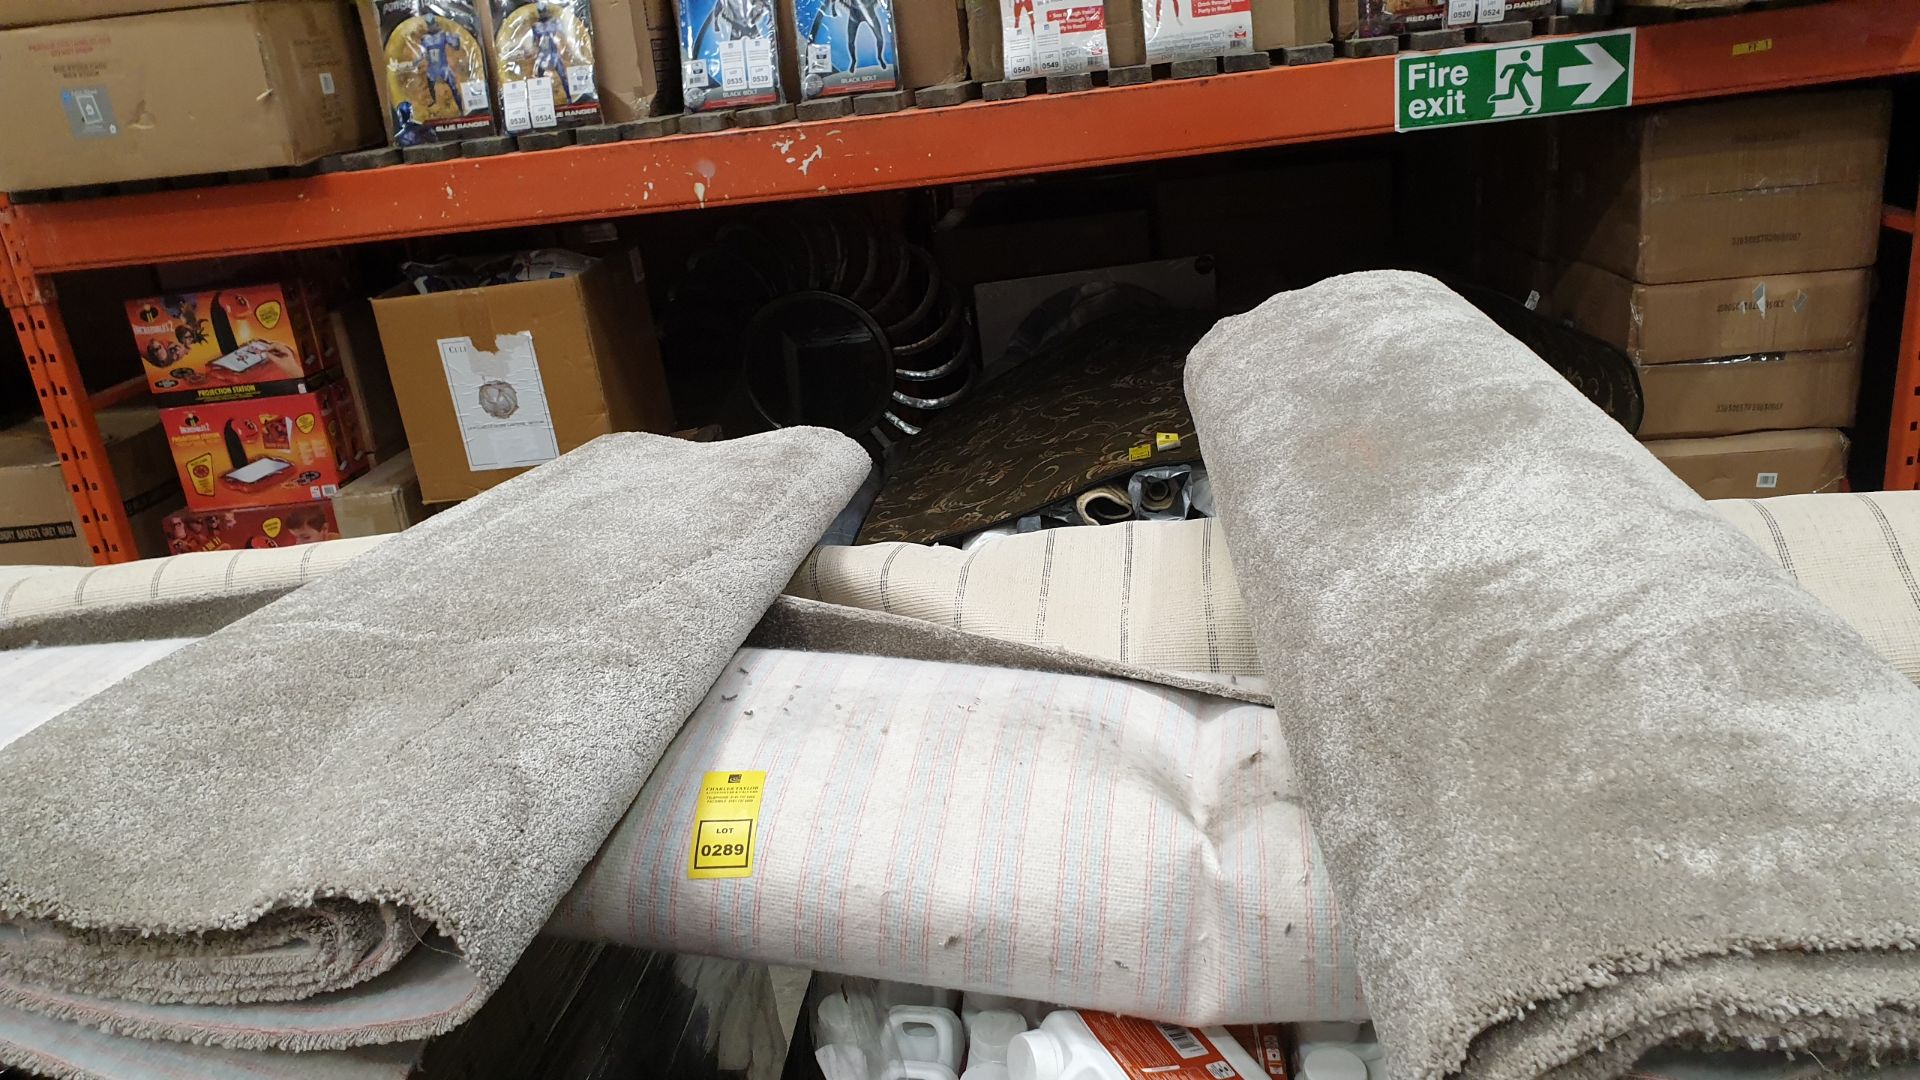 4 X ROLL ENDS OF CARPET - SILVER GREY SHORT PILE